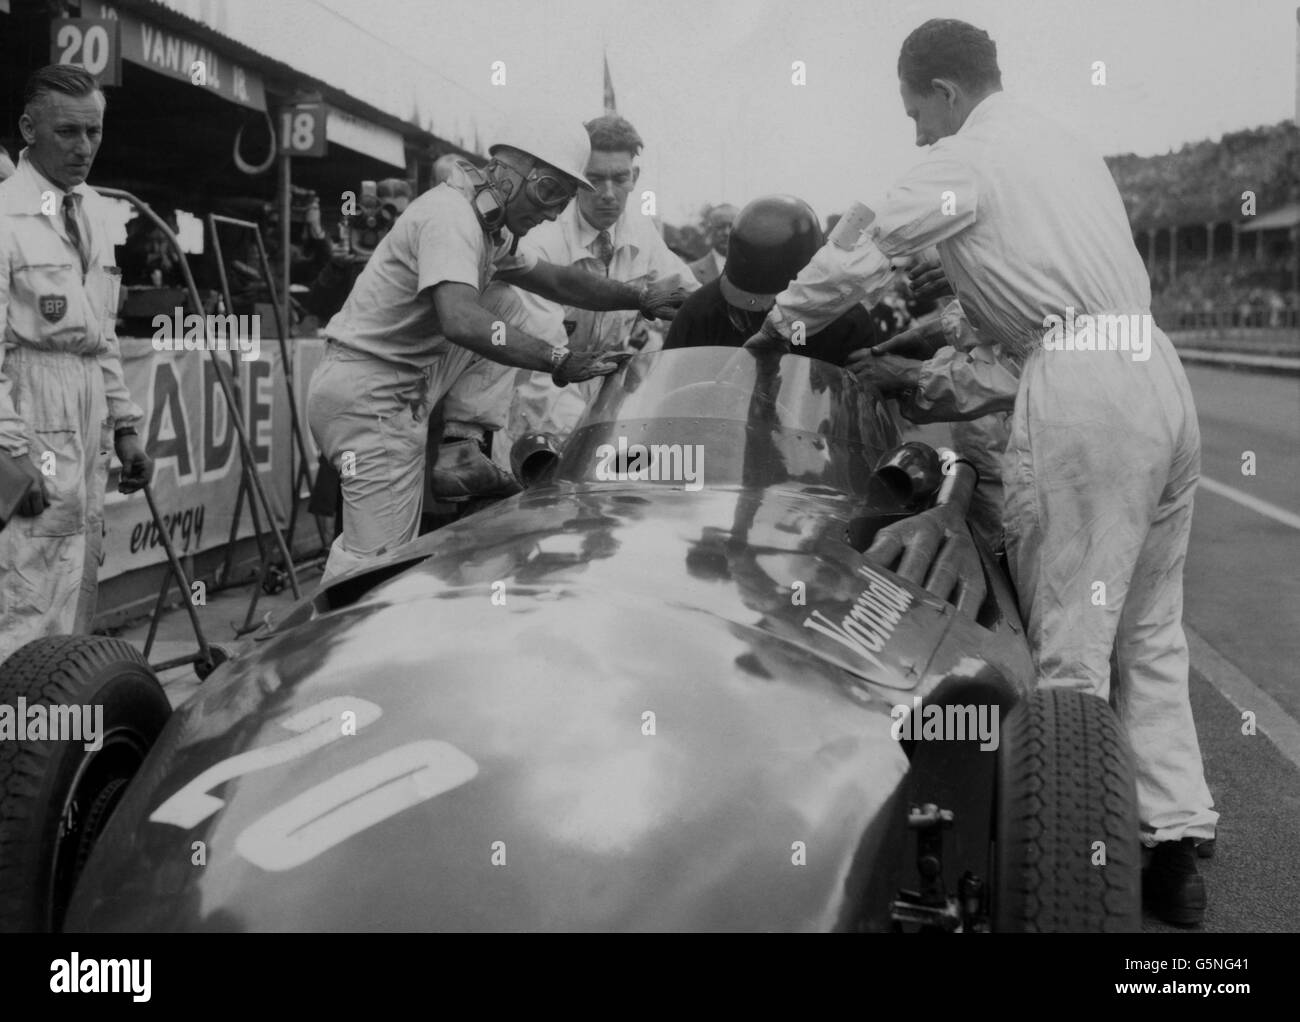 Stirling Moss climbs in to the driving seat of Tony Brooks' Vanwall after his own had developed problems during the Grand Prix d'Europe race at Aintree, Liverpool. Moss went on to achieve the first all-British victory in a major classic since 1923. Stock Photo